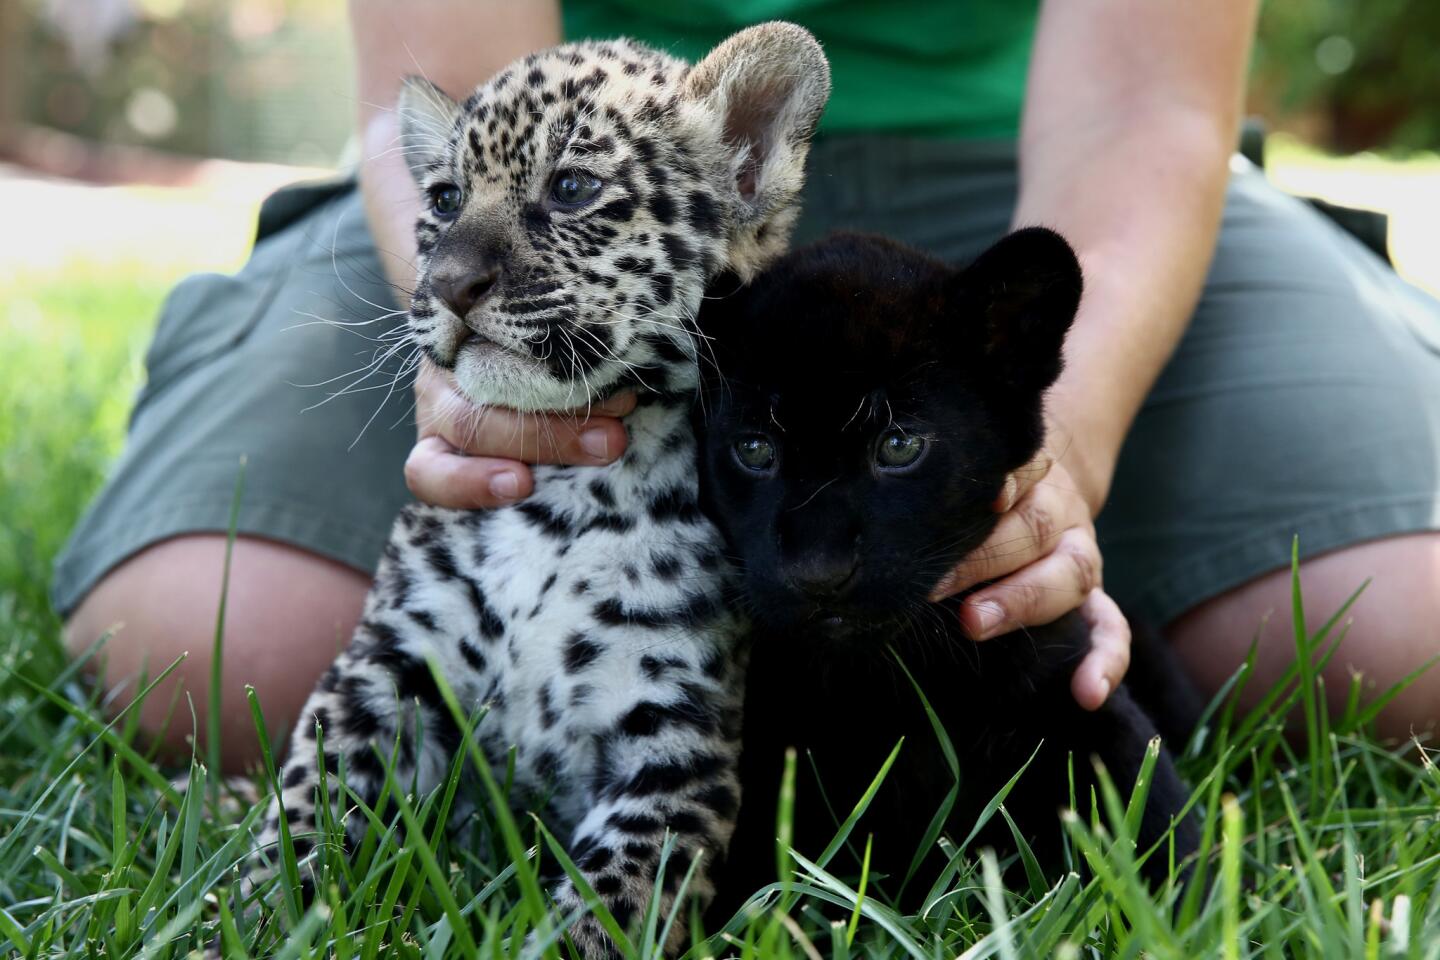 Andrea Czerny, employee of the Attica Zoological Park, holds five-week-old baby jaguars Lucky, left, and Jucky inside the park in Spata, Greece, on July 16, 2016.